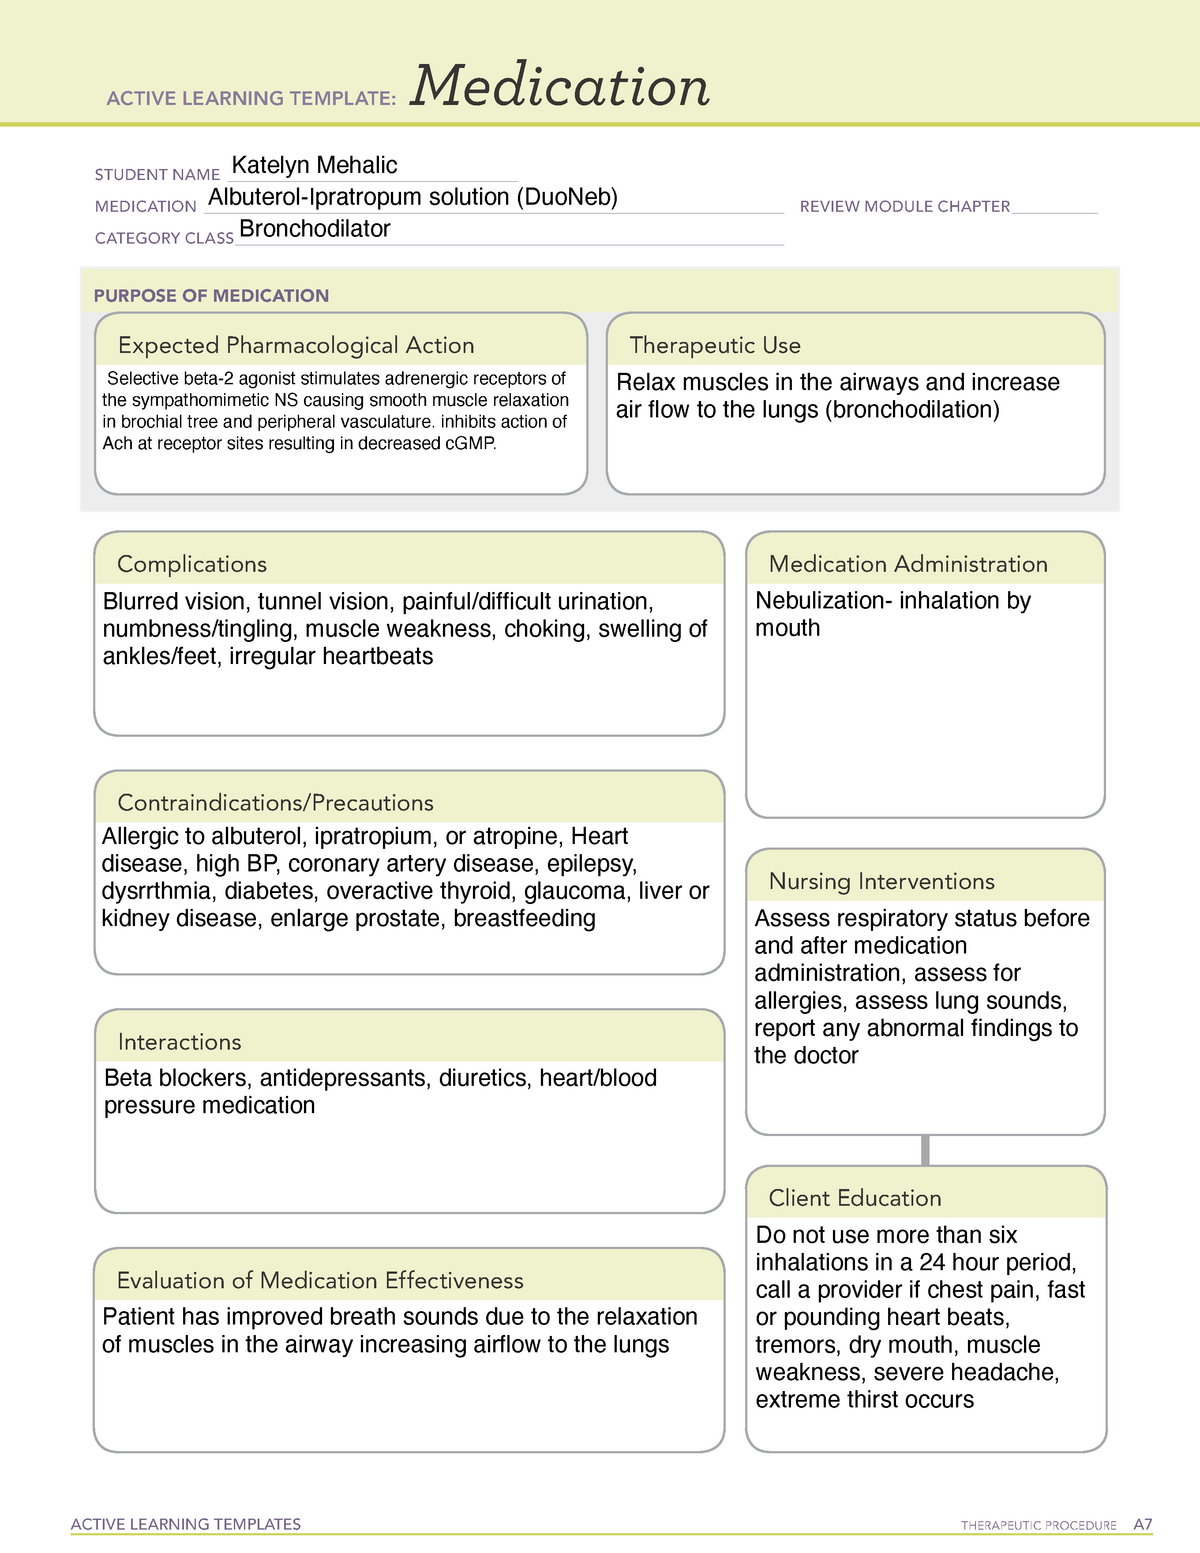 Duo Neb adult 1 ati assignments ACTIVE LEARNING TEMPLATES